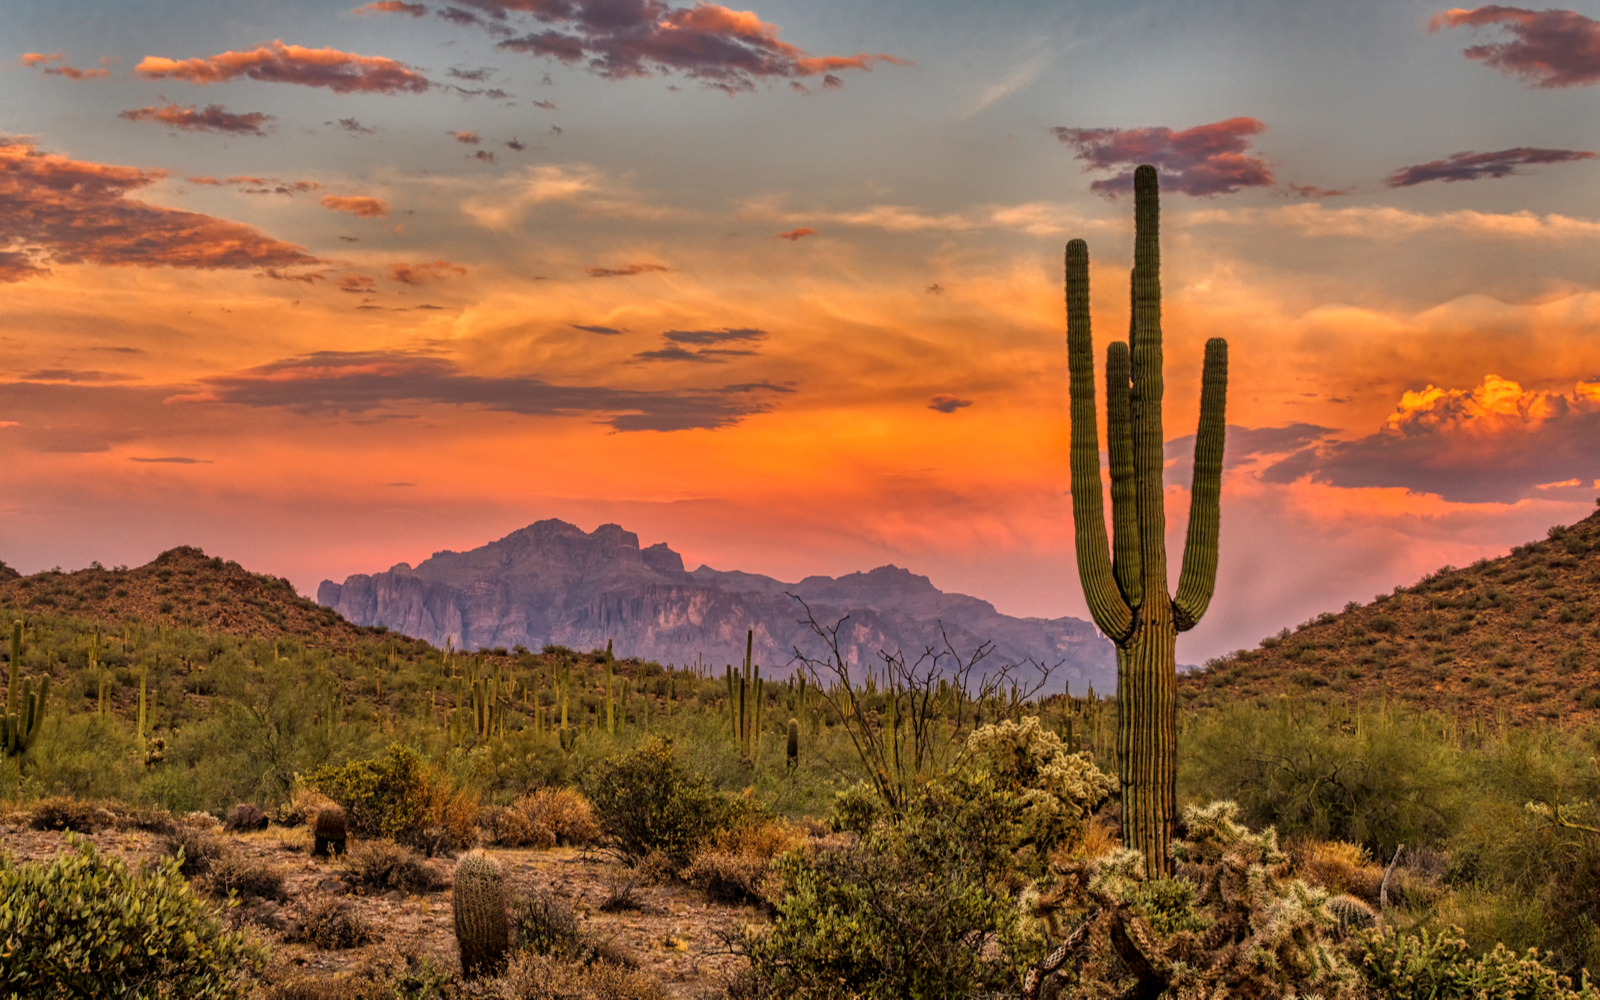 The desert with gorgeous scenery, one of the best things to do in Phoenix